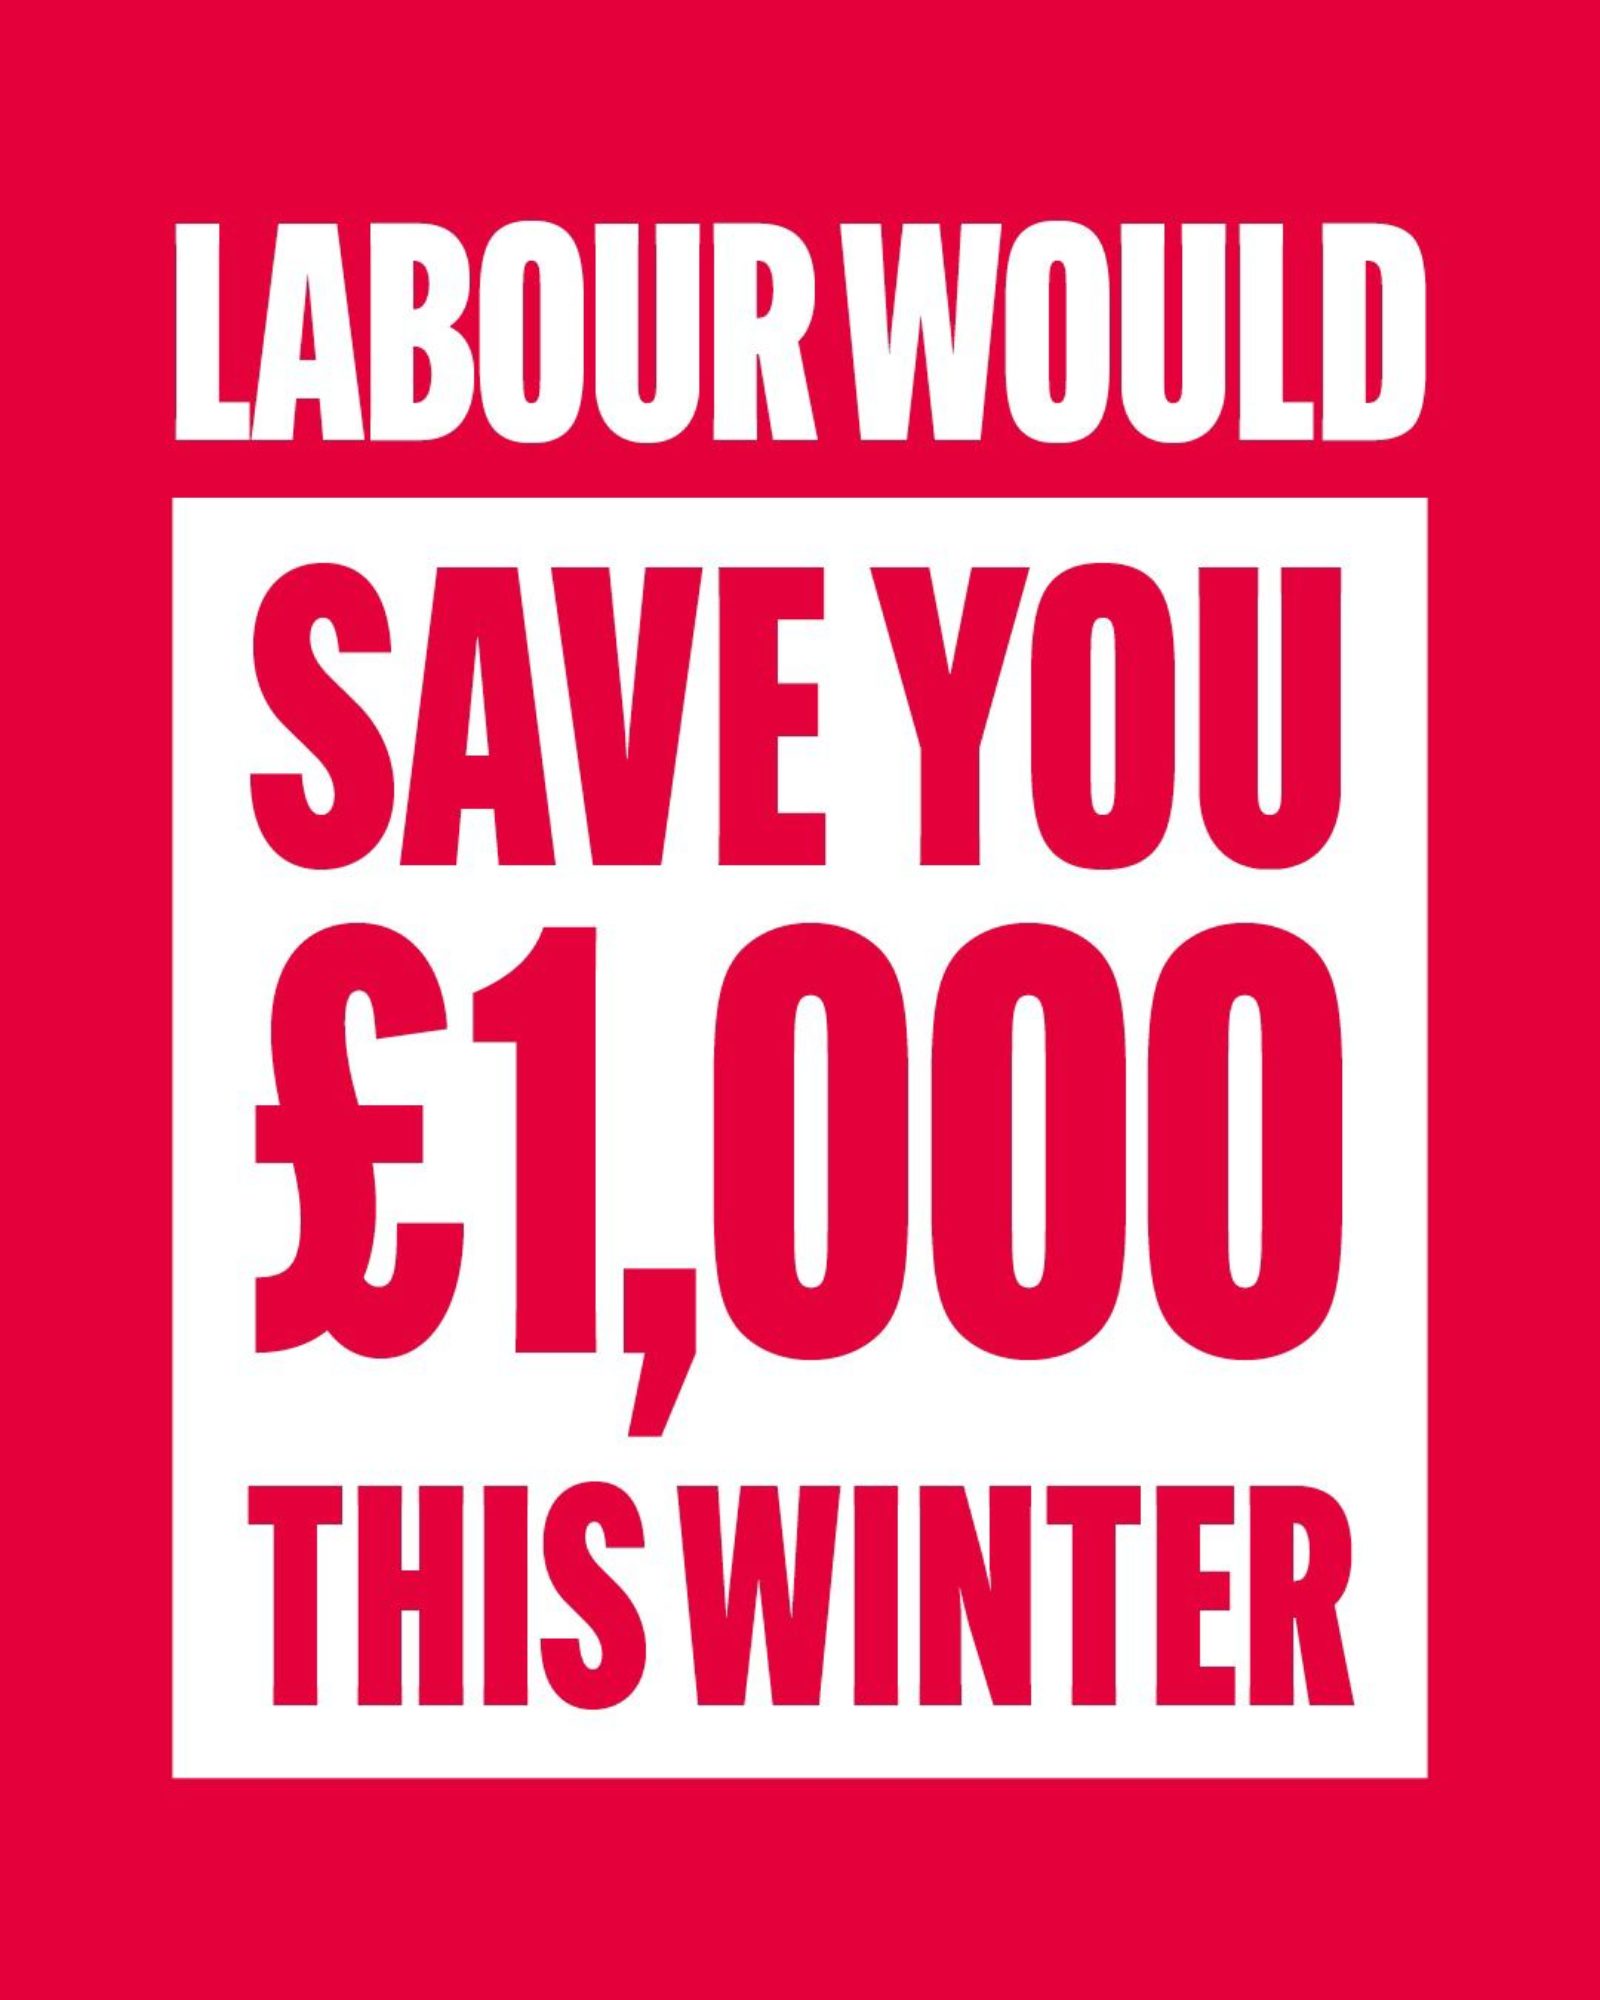 Labour would save you £1000 this winter